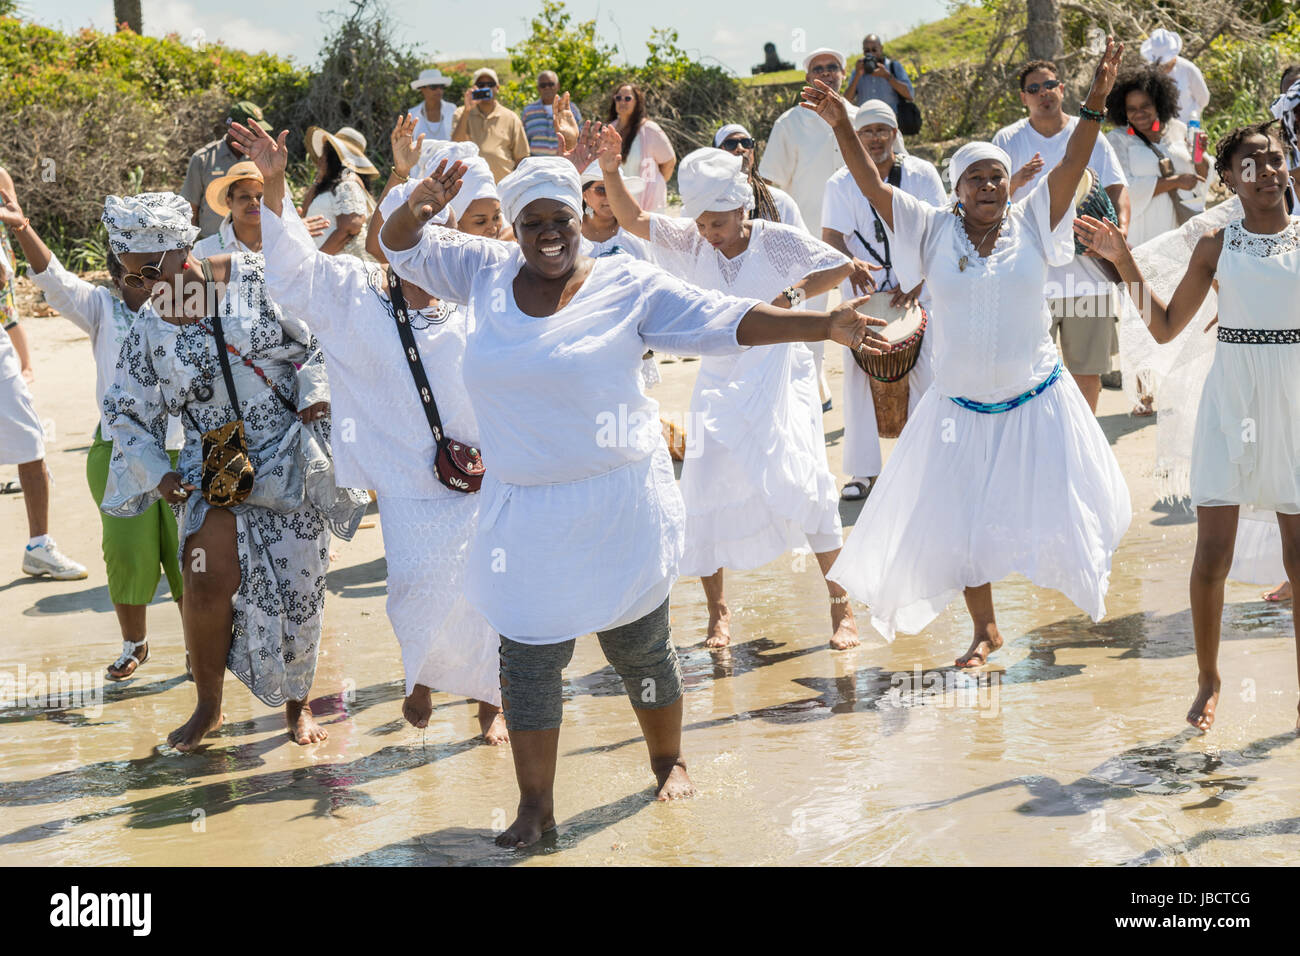 Descendants of enslaved Africans brought to Charleston in the Middle Passage dance to honor their relatives lost during a remembrance ceremony along the ocean front June 10, 2017 in Sullivan's Island, South Carolina. The Middle Passage refers to the triangular trade in which millions of Africans were shipped to the New World as part of the Atlantic slave trade. An estimated 15% of the Africans died at sea and considerably more in the process of capturing and transporting. The total number of African deaths directly attributable to the Middle Passage voyage is estimated at two million Africans. Stock Photo